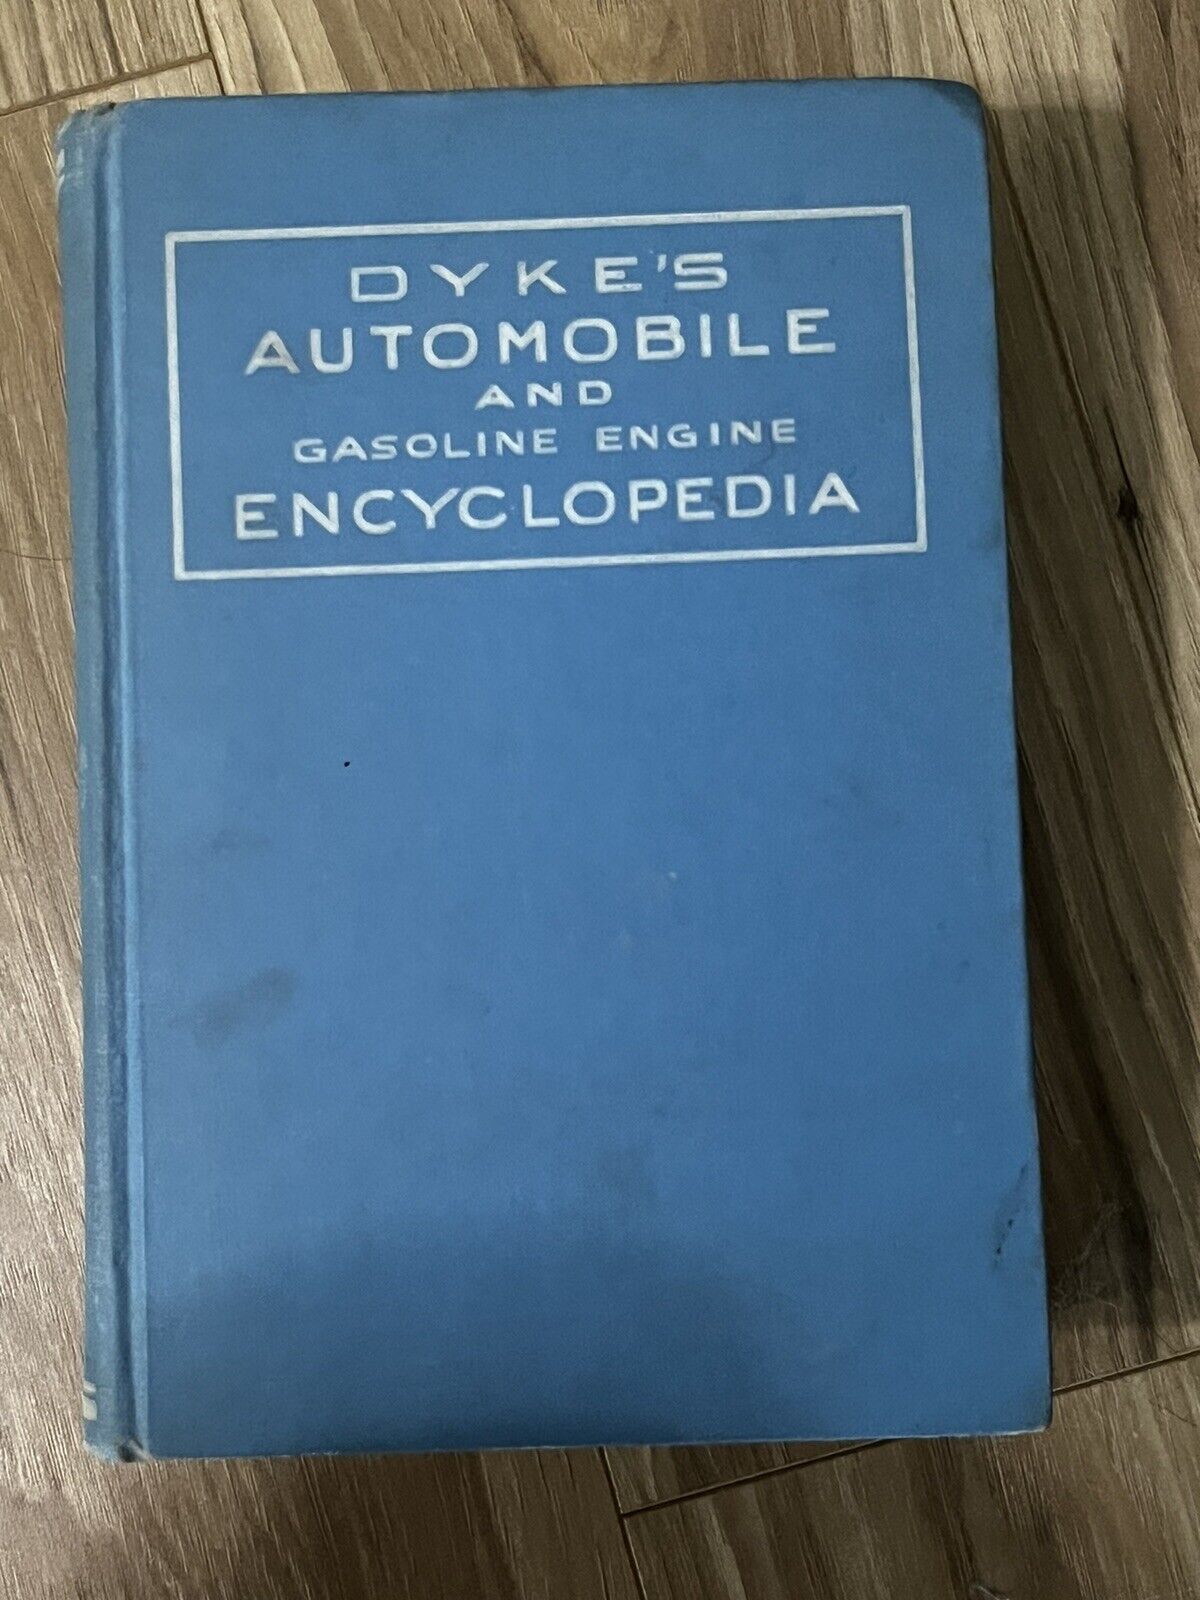 Dykes Automobile and Gasoline Engine Encyclopedia 21st Edition